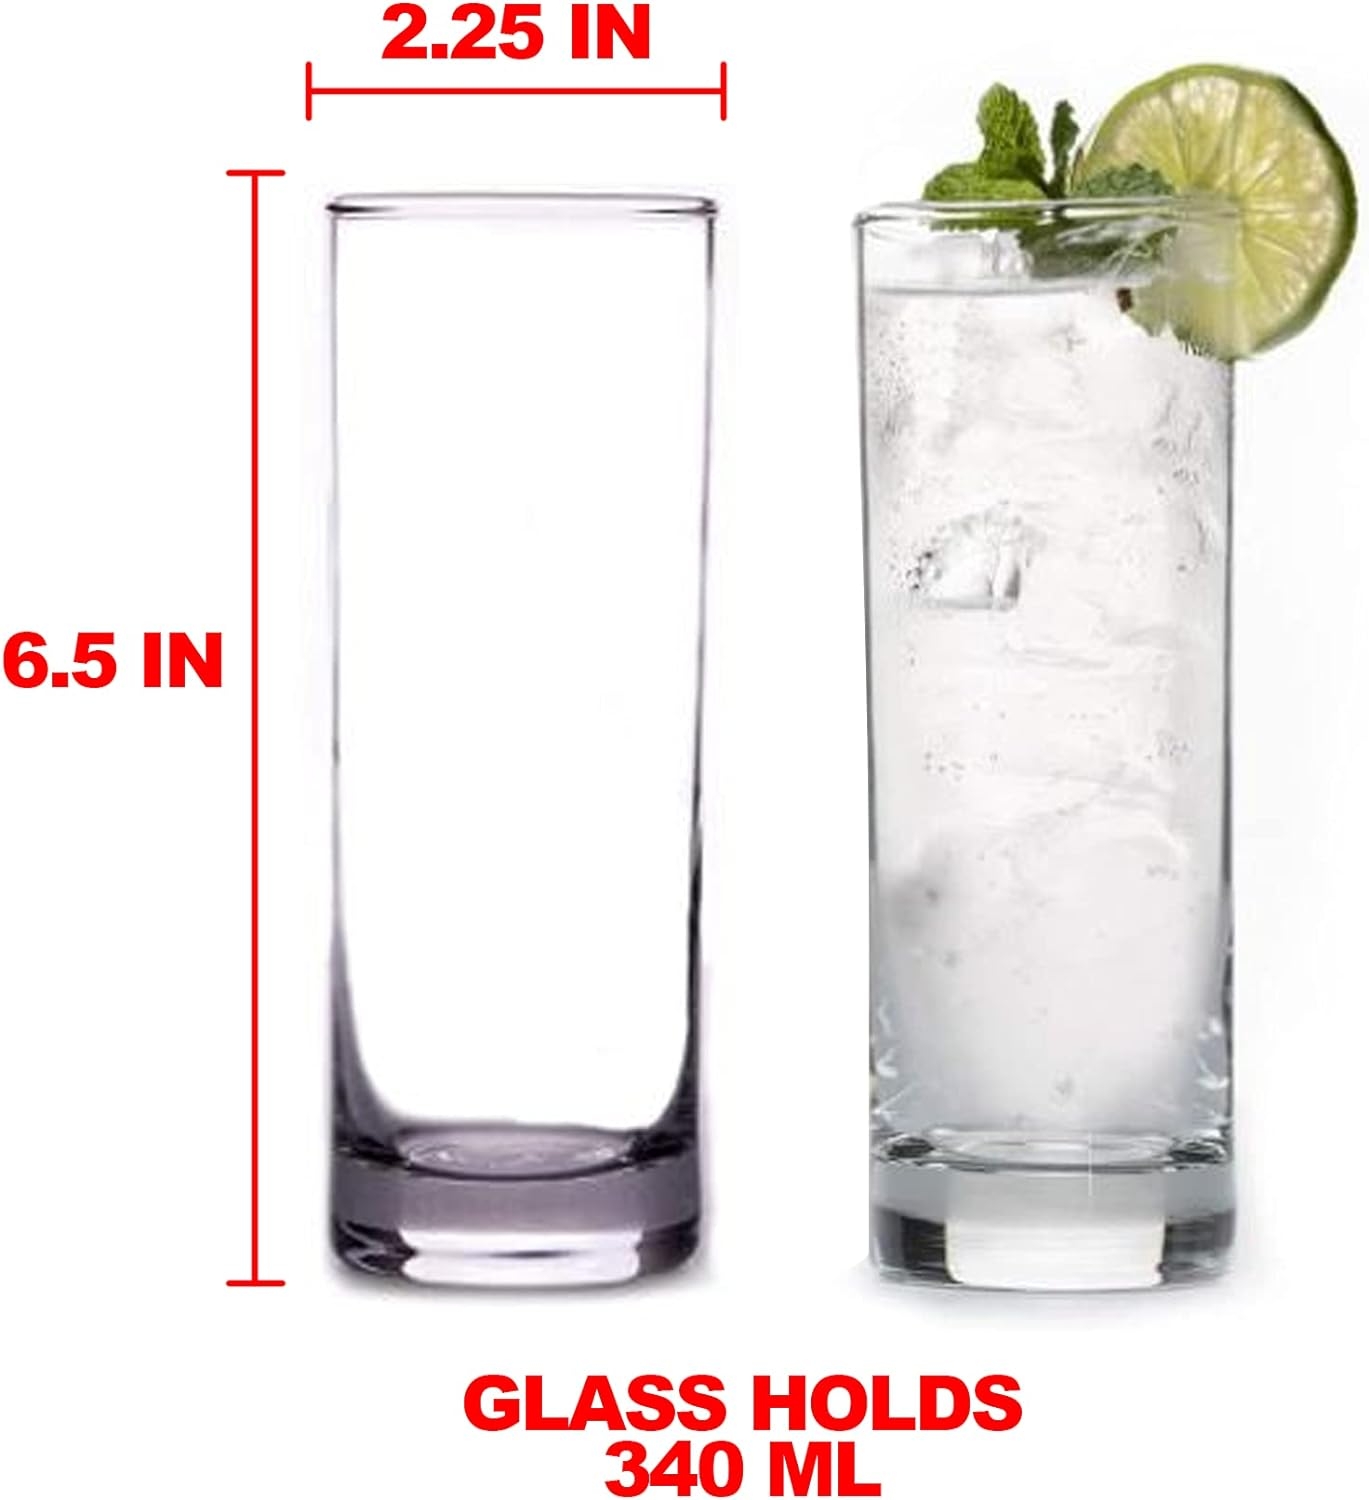 High Quality High Ball Drinking Glass Bar Glassware for Mojito, Whiskey, Cocktails